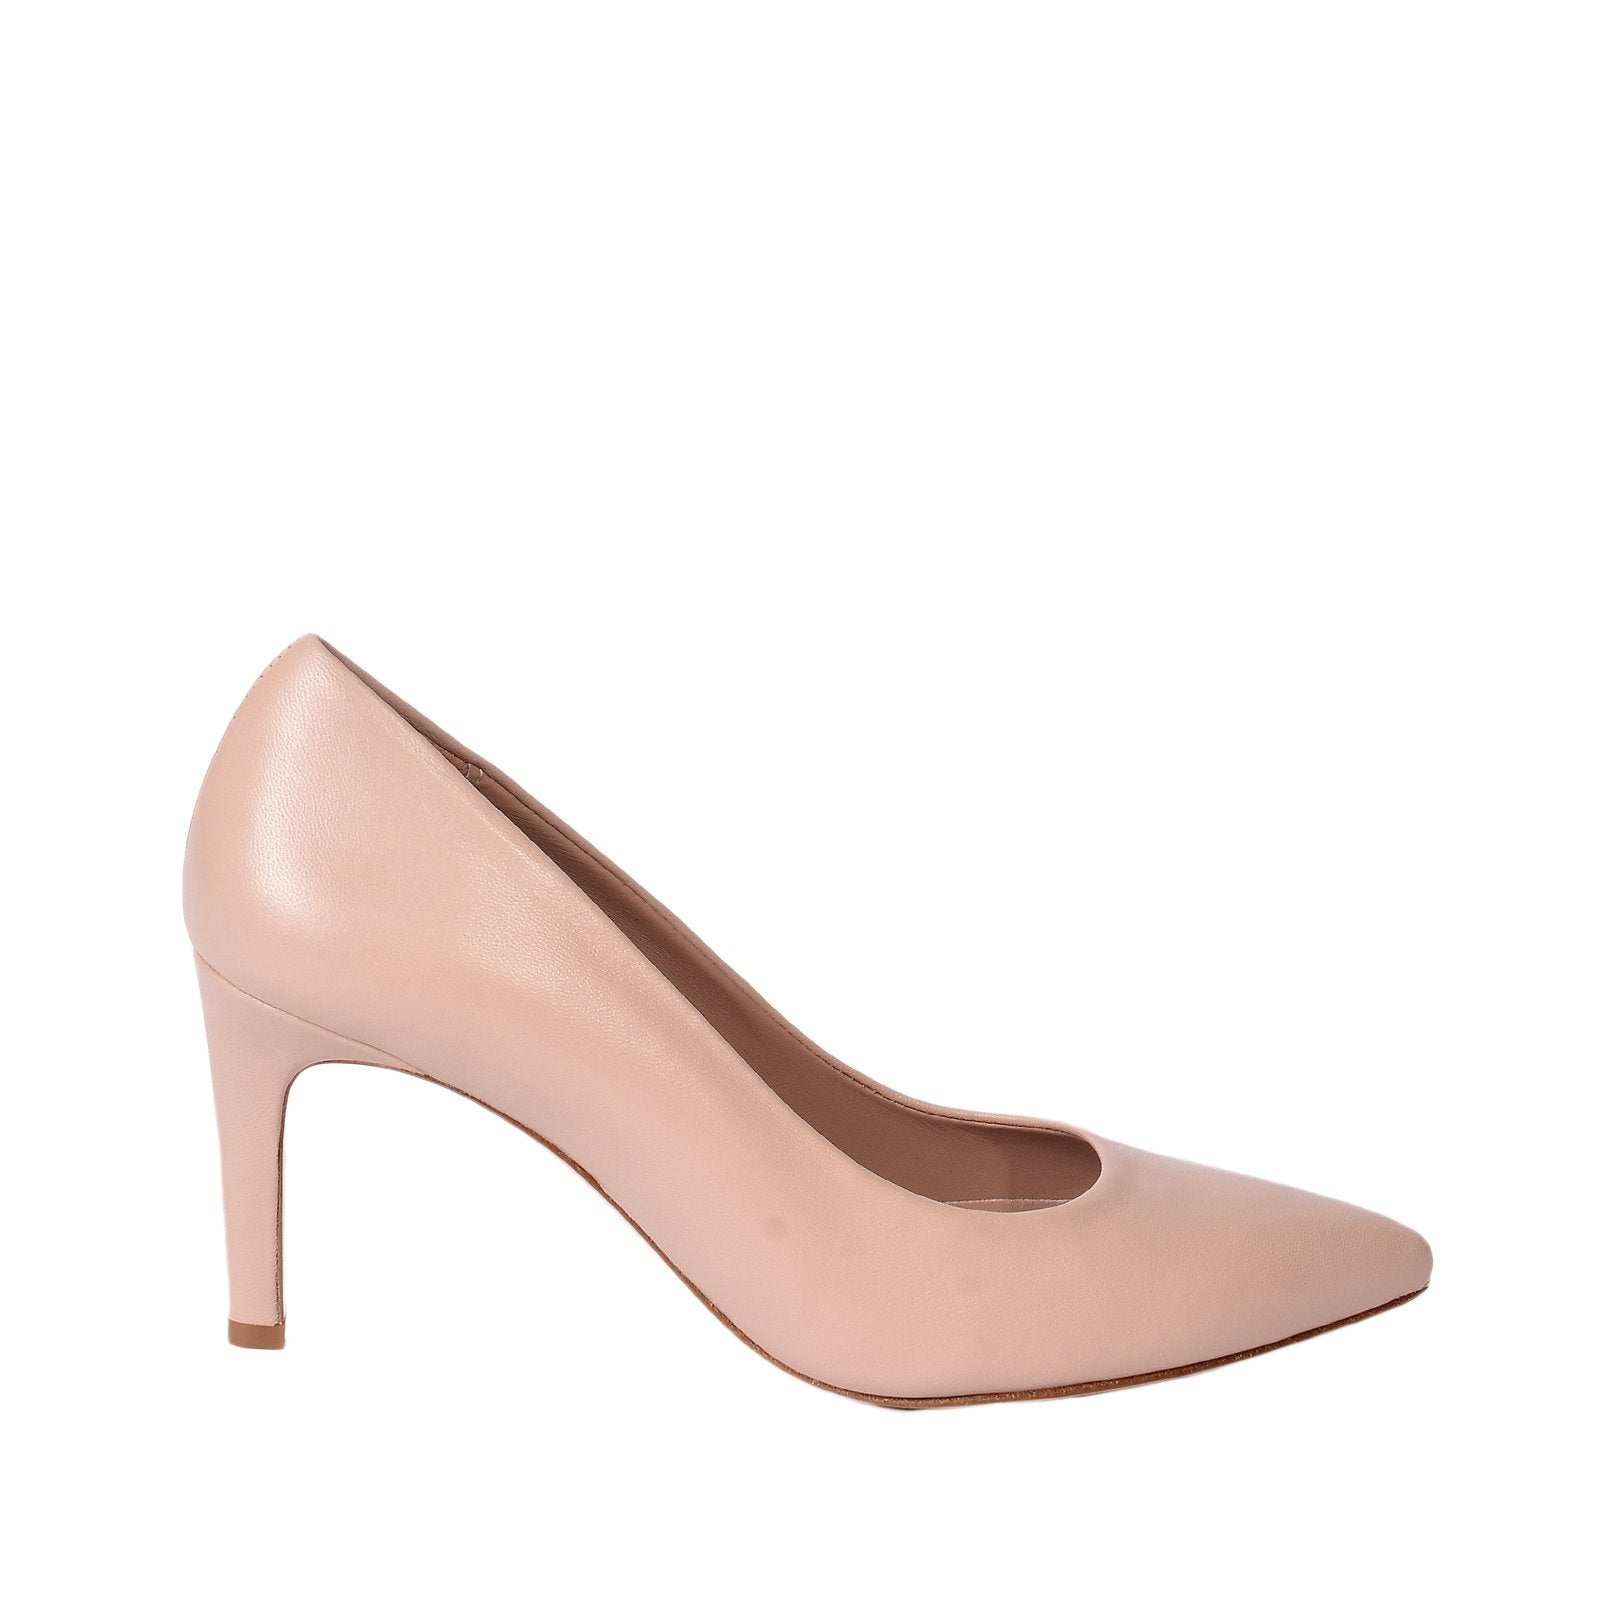 Rosa Nude Leather Pumps Heels 790-004-1 - 1